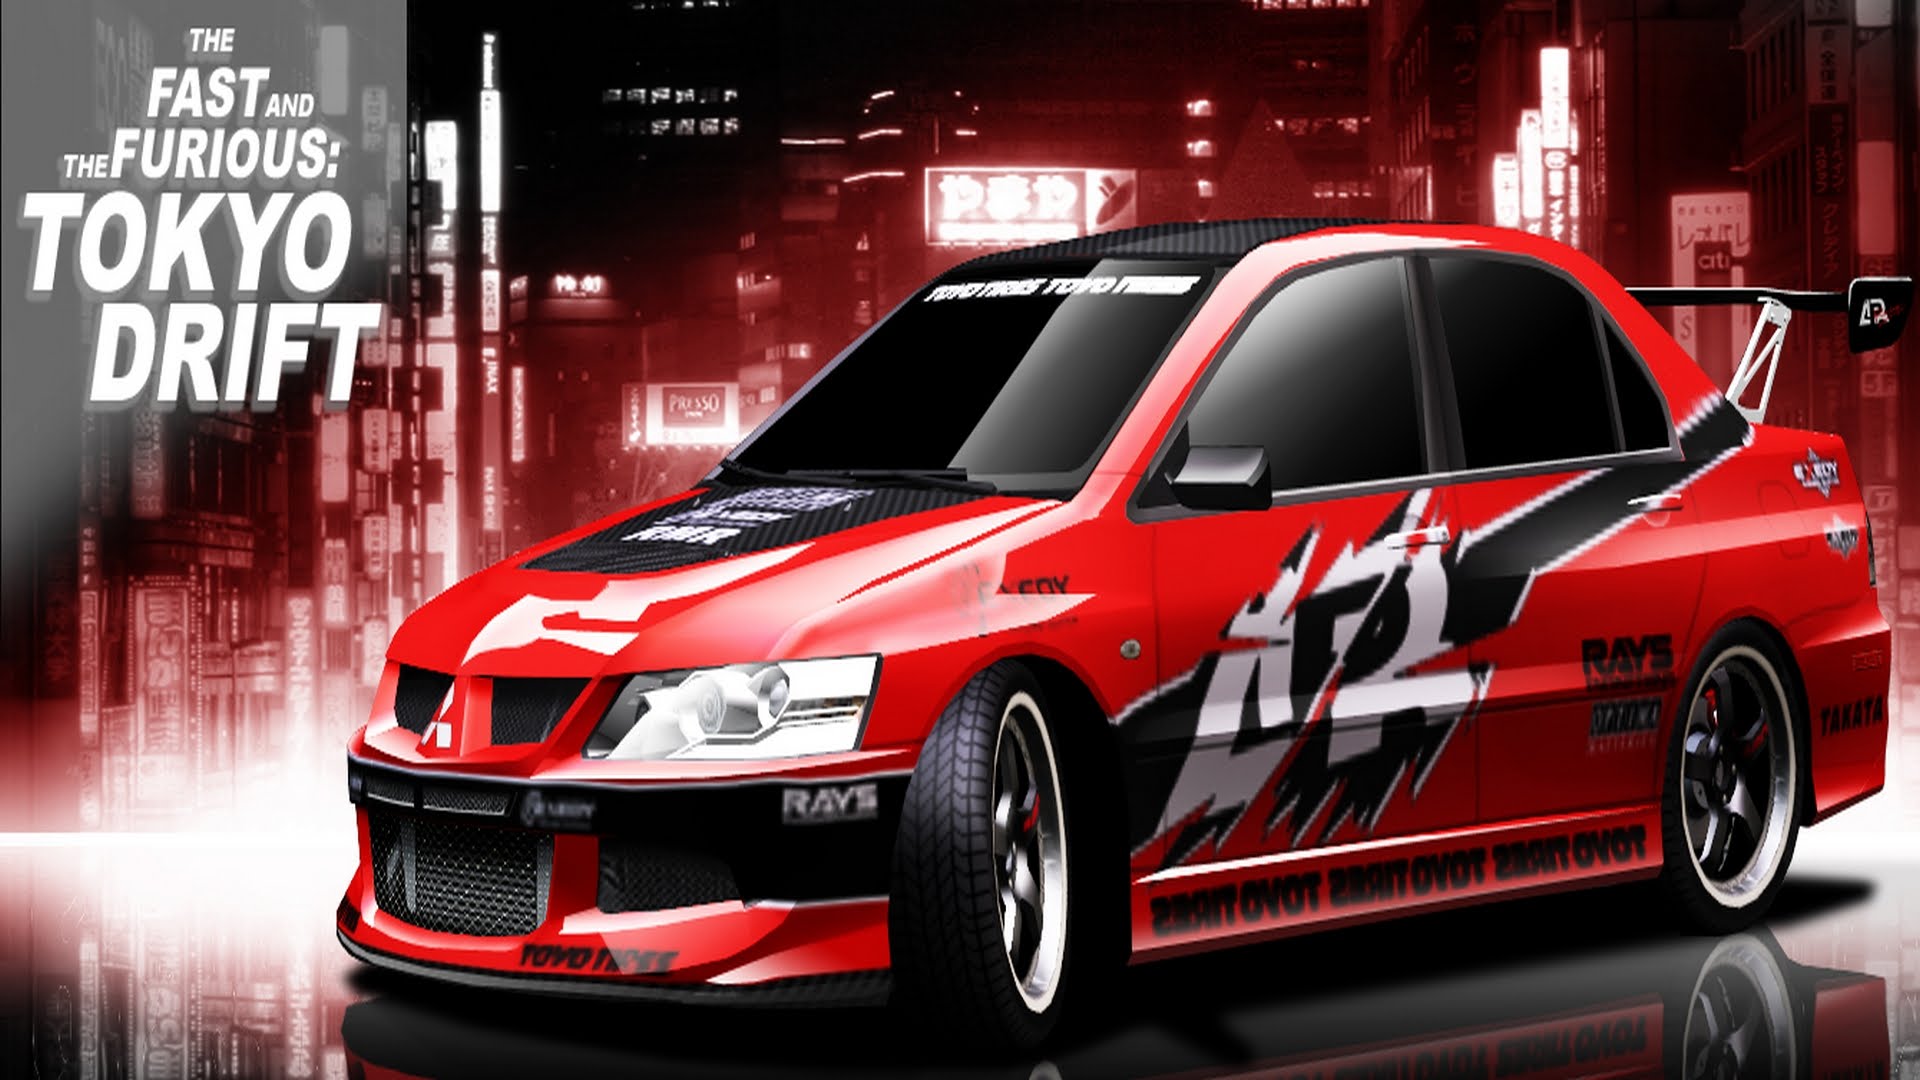 The Fast And The Furious: Tokyo Drift Wallpapers - Wallpaper